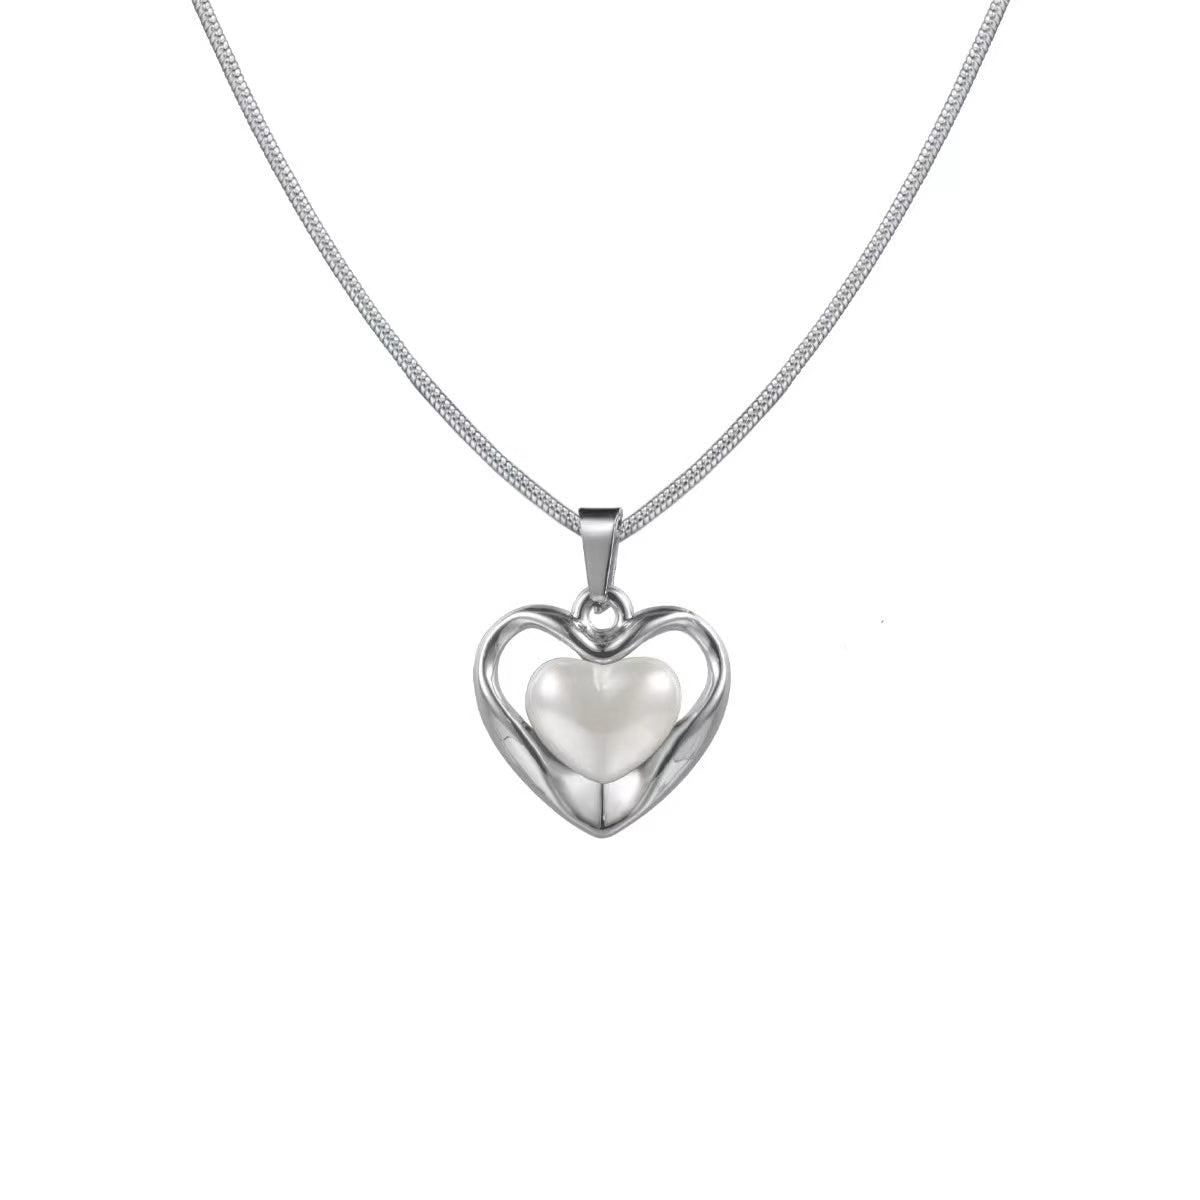 N8 Heart Pearl Pendant Necklace | Daily Wear Necklace